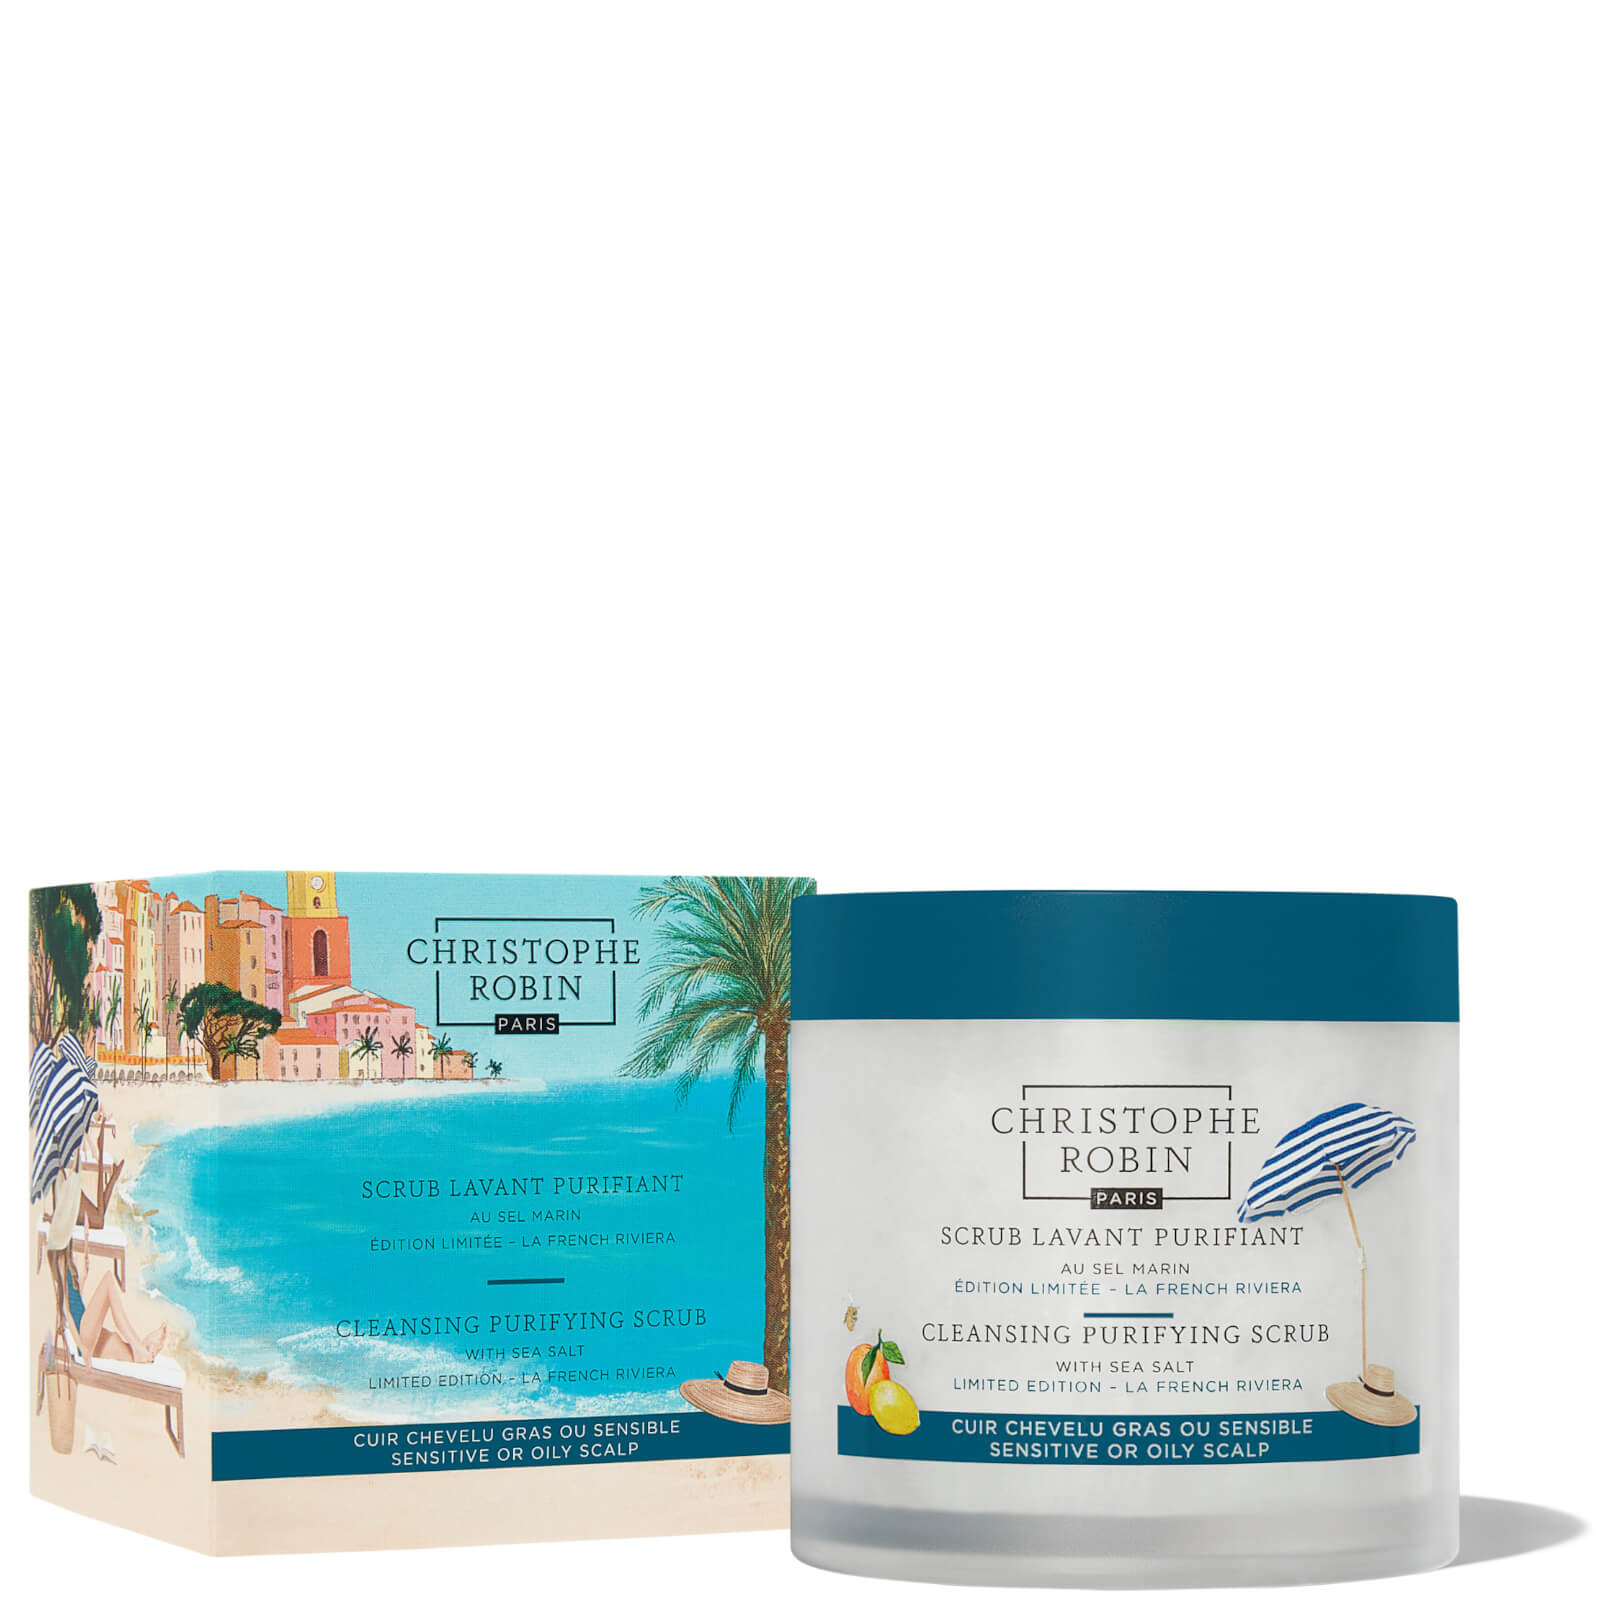 Image of Christophe Robin Limited Edition French Riviera Cleansing Purifying Scrub with Sea Salt 250ml